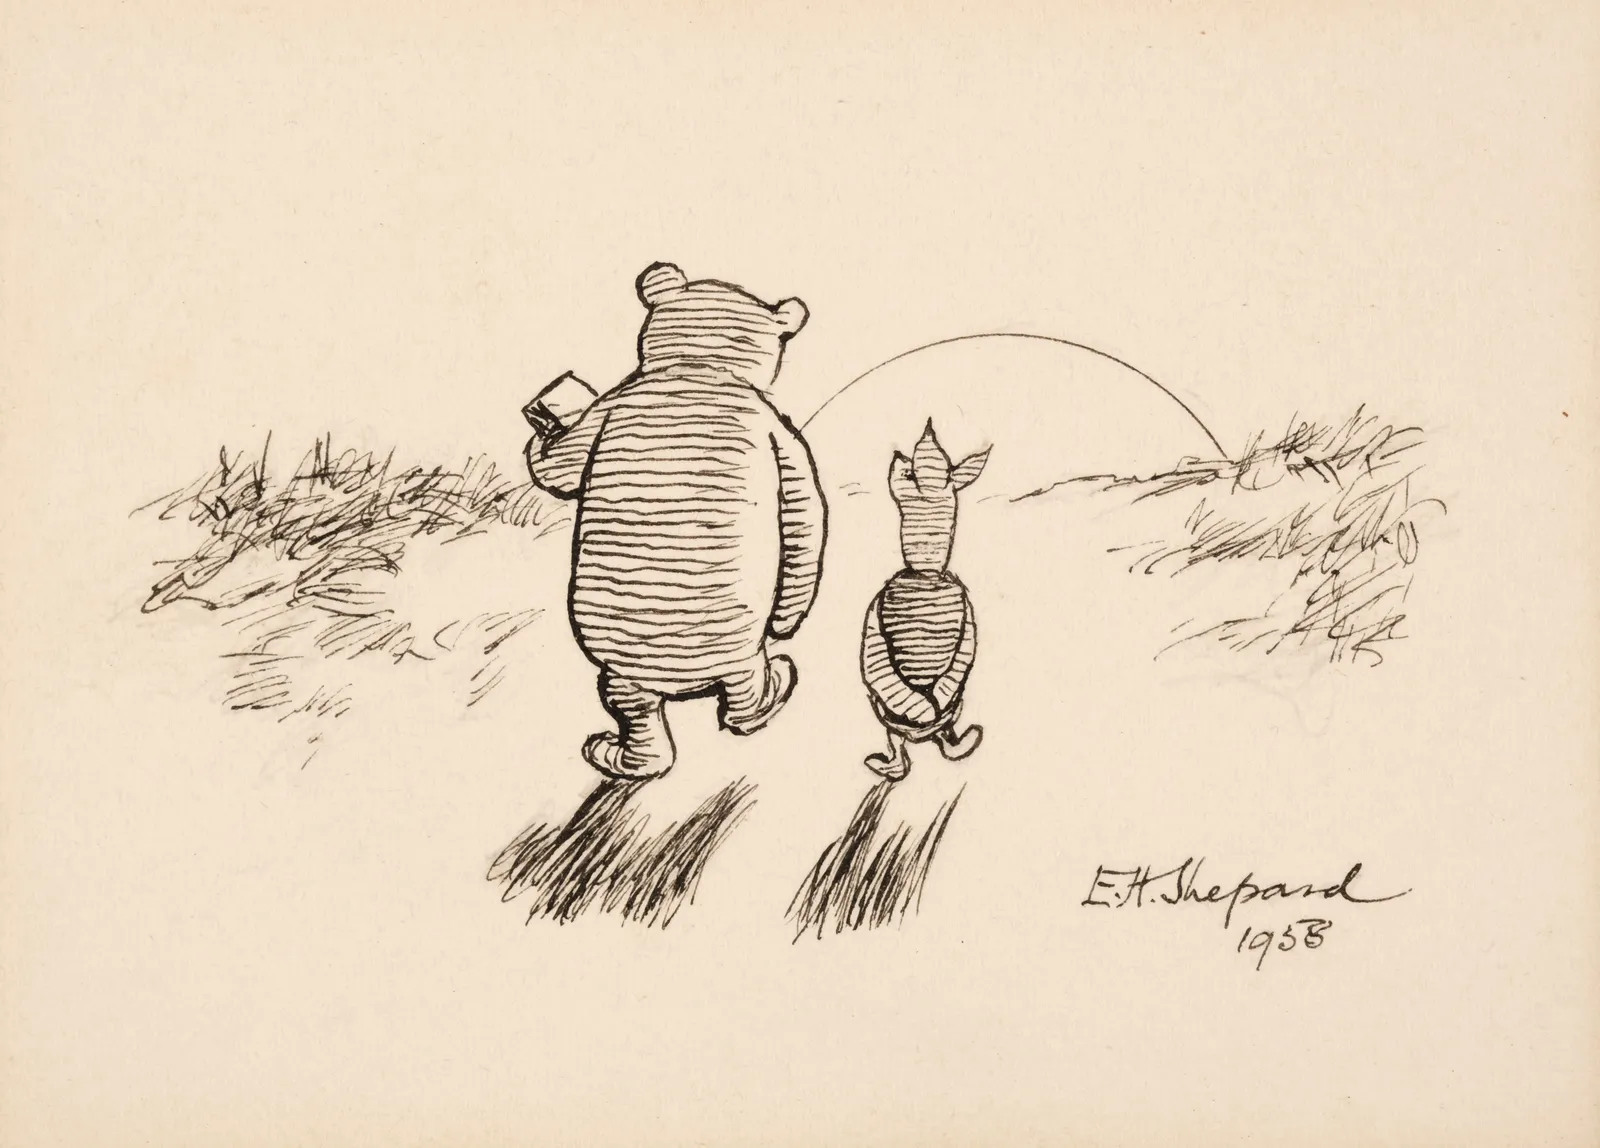 winnie the pooh outline drawings